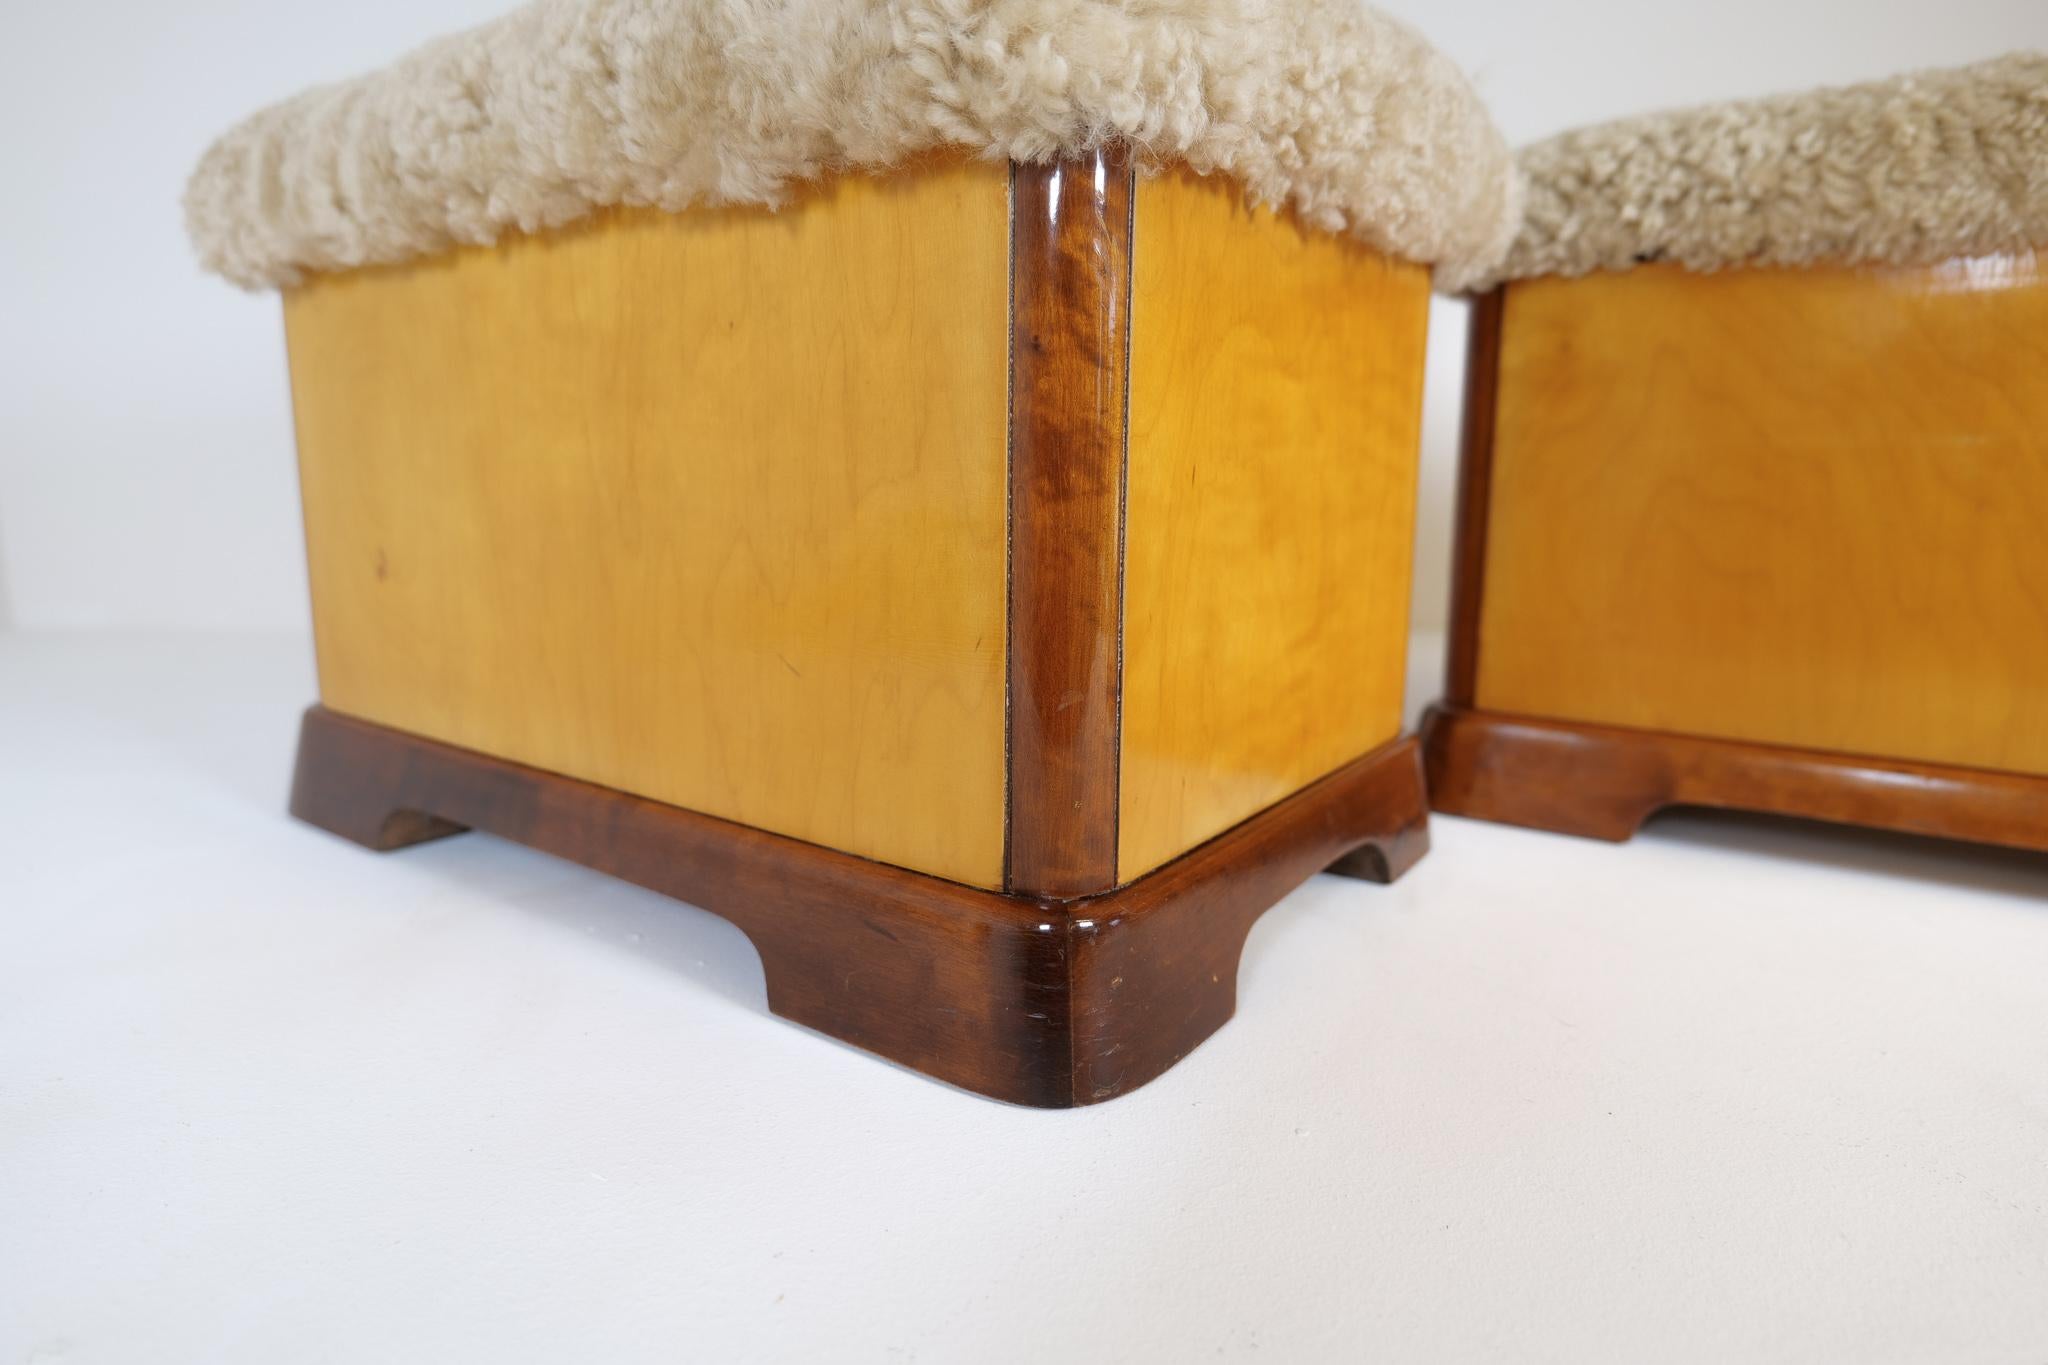 Swedish Art Deco Stools in Lacquered Birch and Sheepskin/Shearling Seat 1940s For Sale 9